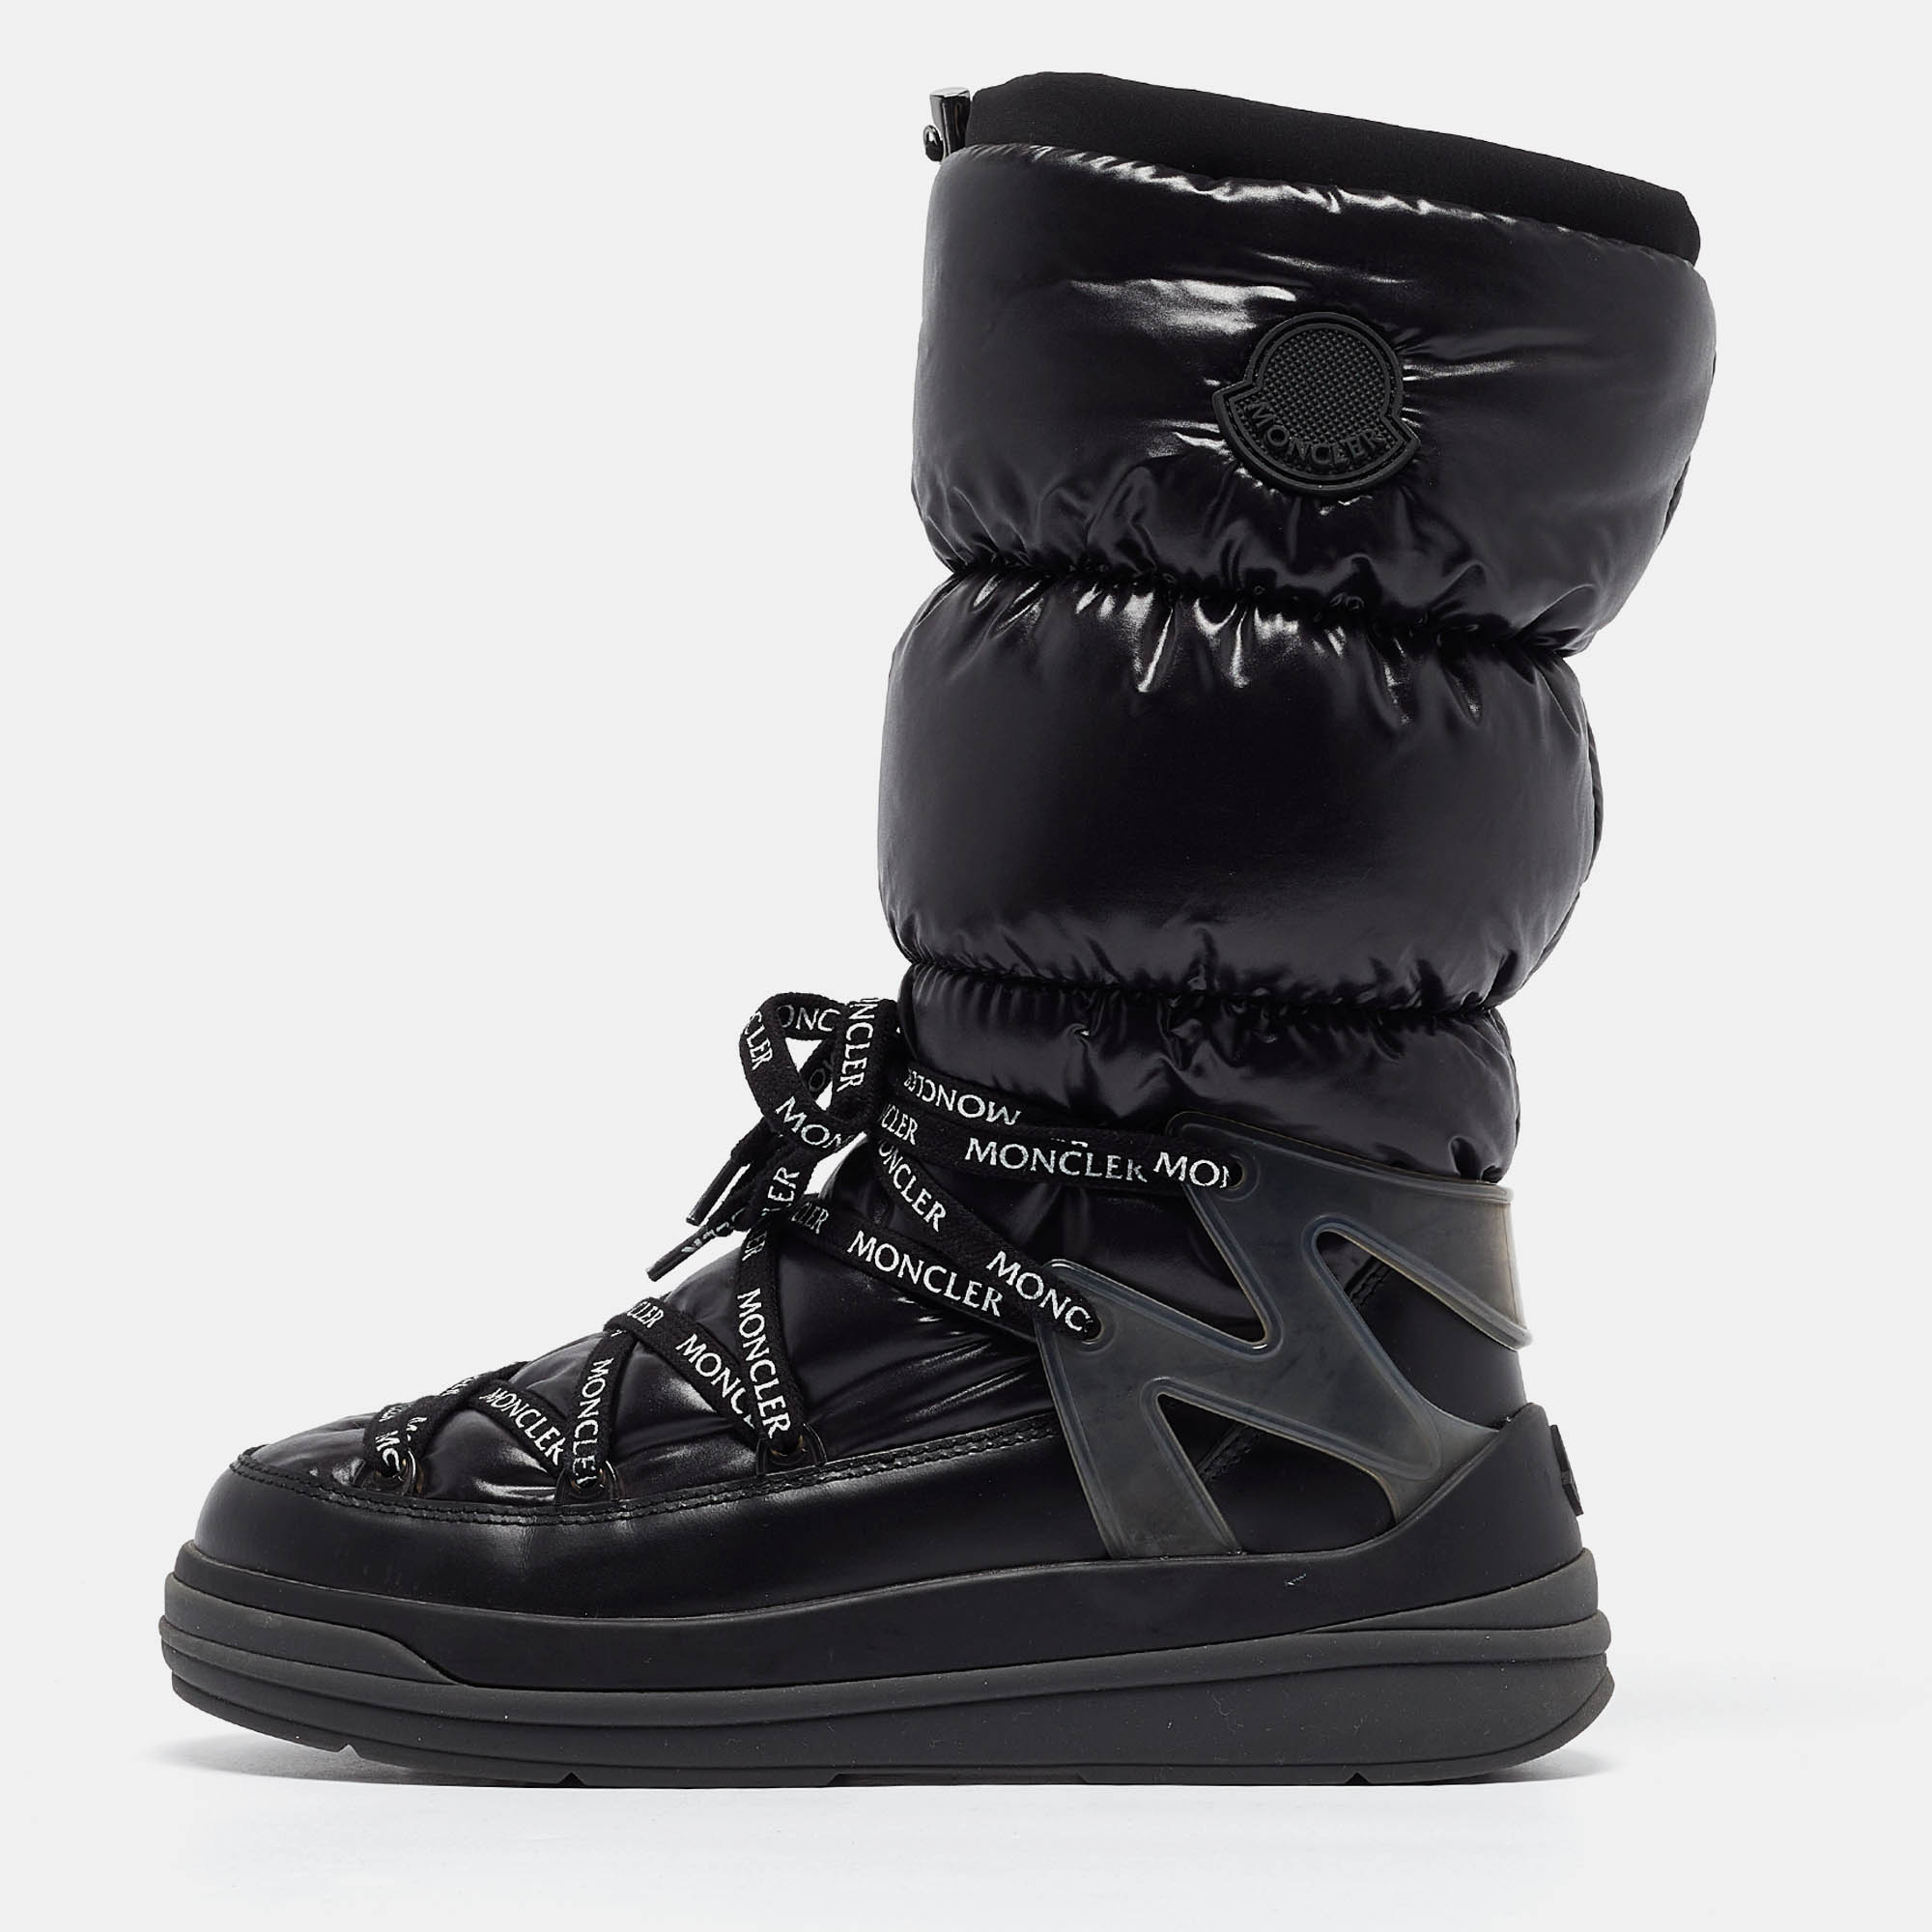 Moncler black nylon and leather insoluxe mid calf snow boots size 38